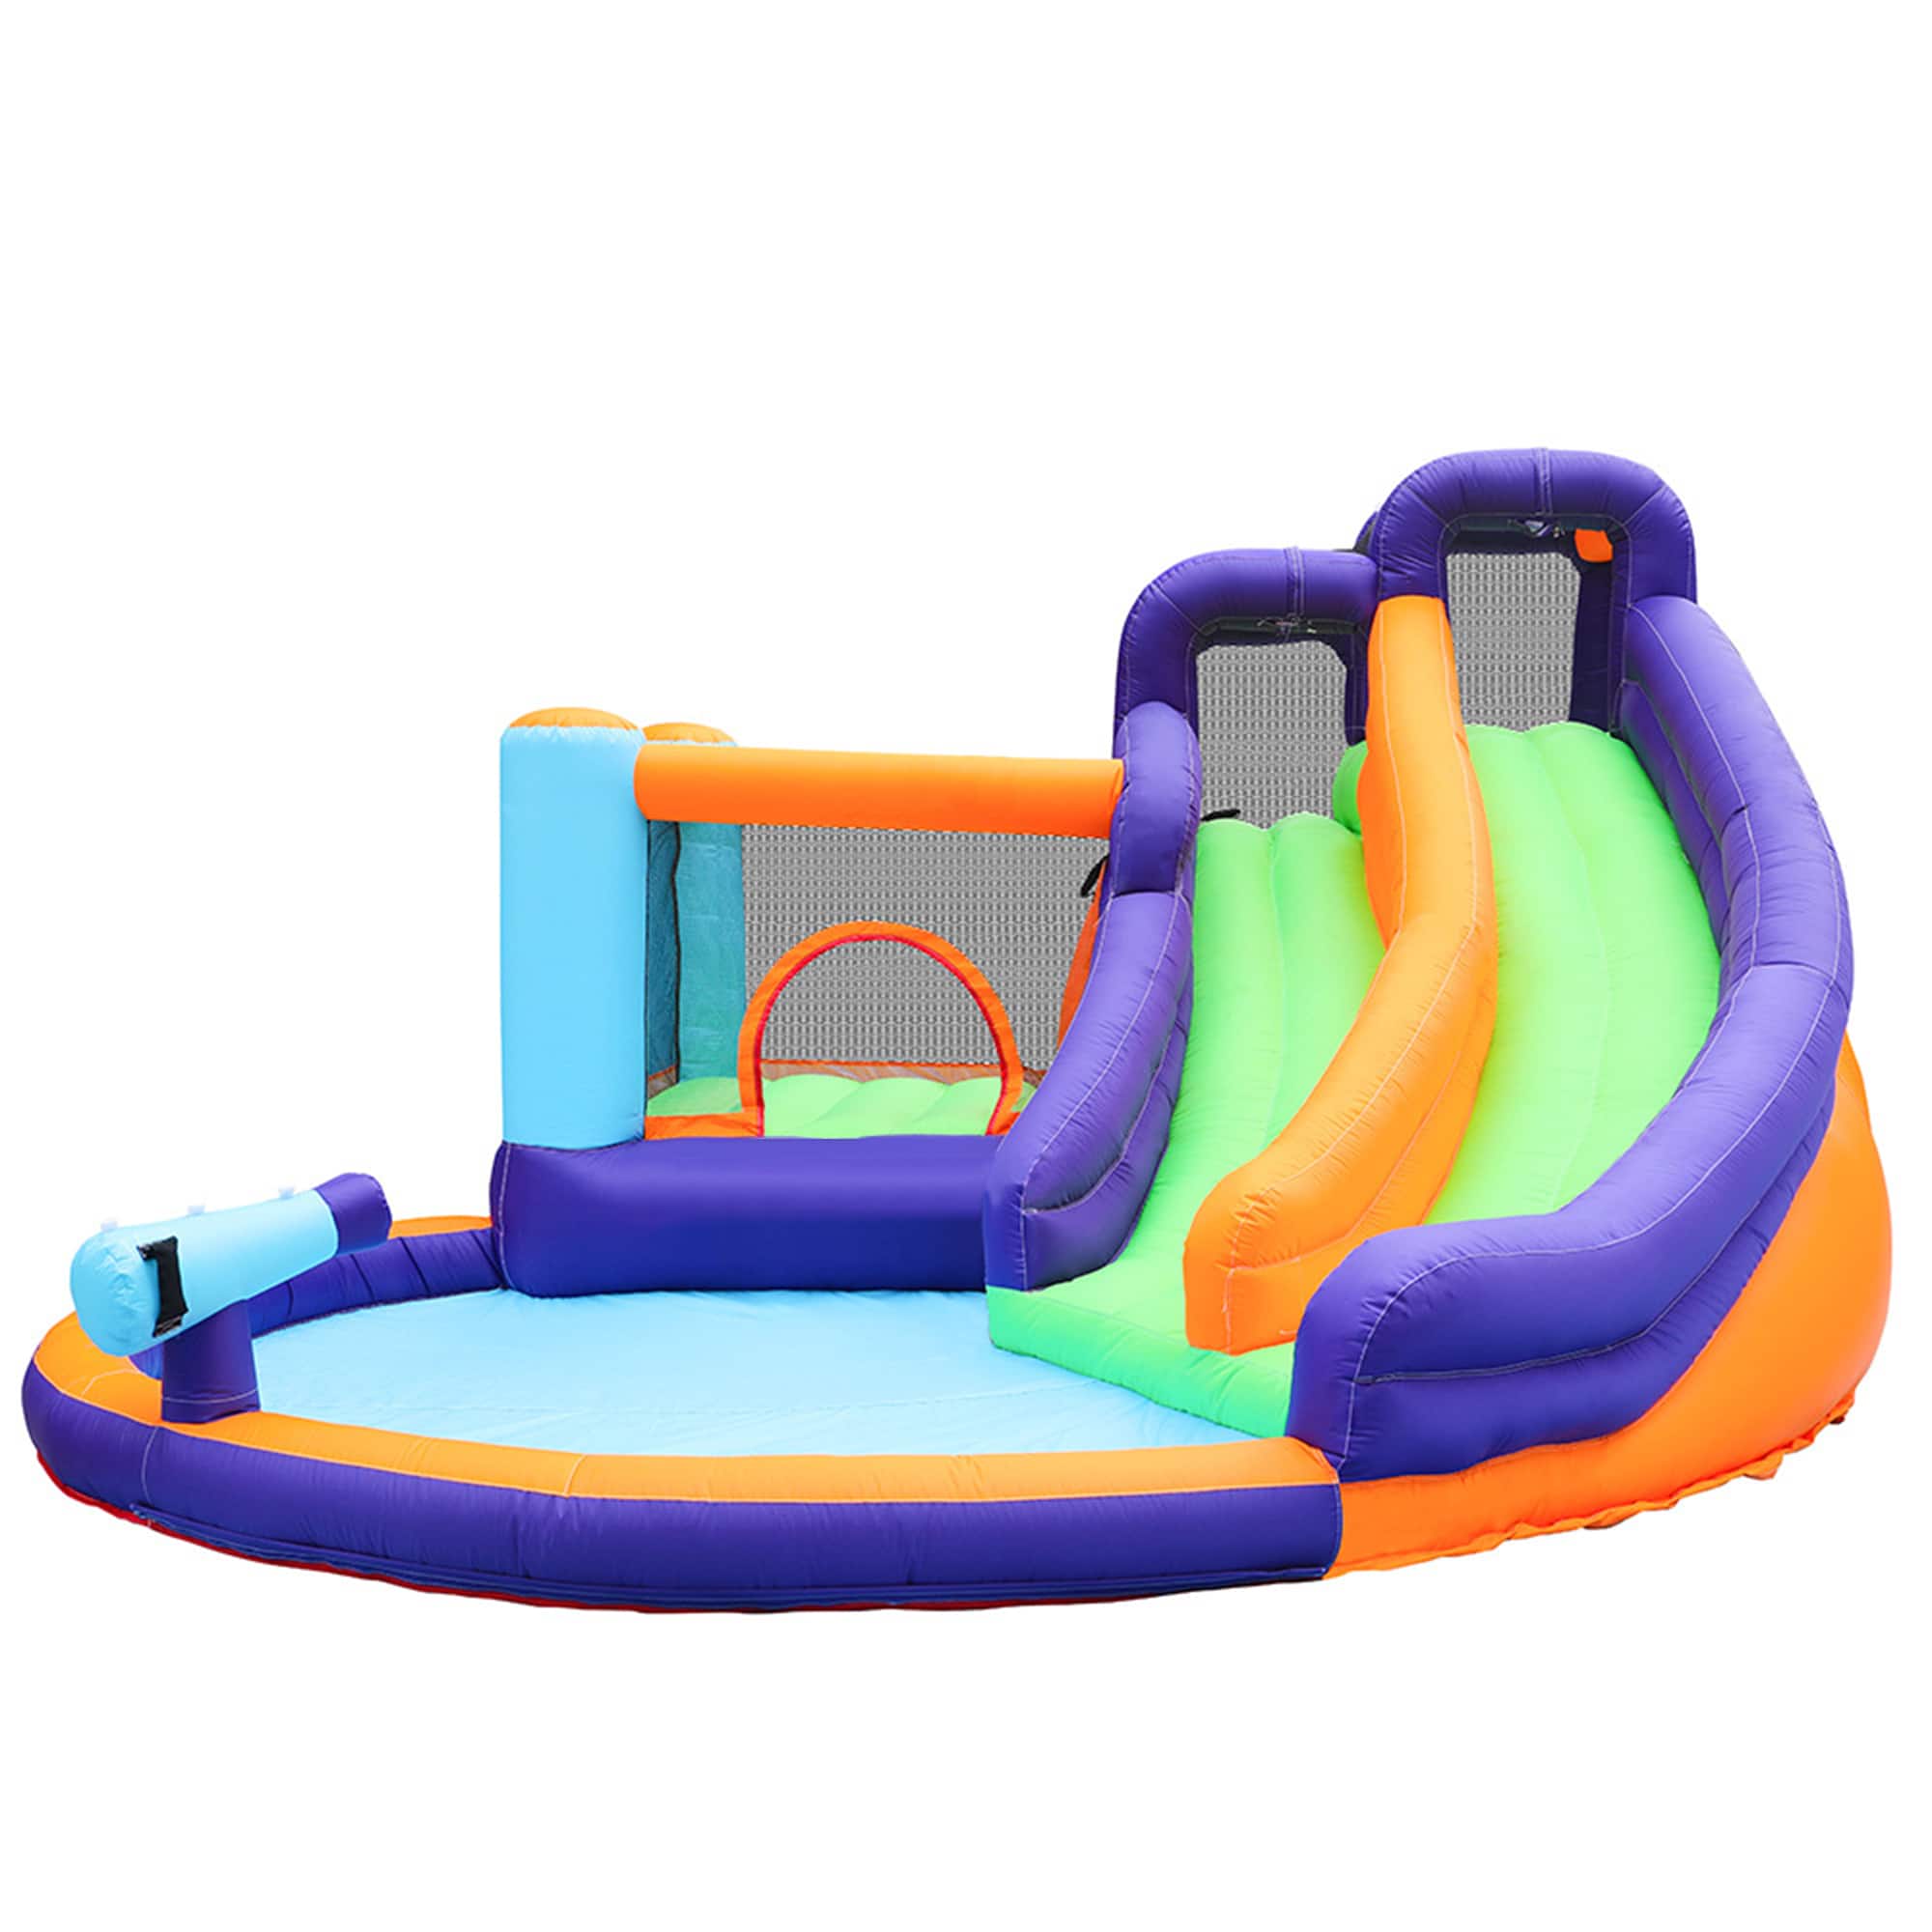 Salus Double Slide Water Park with Water Cannon